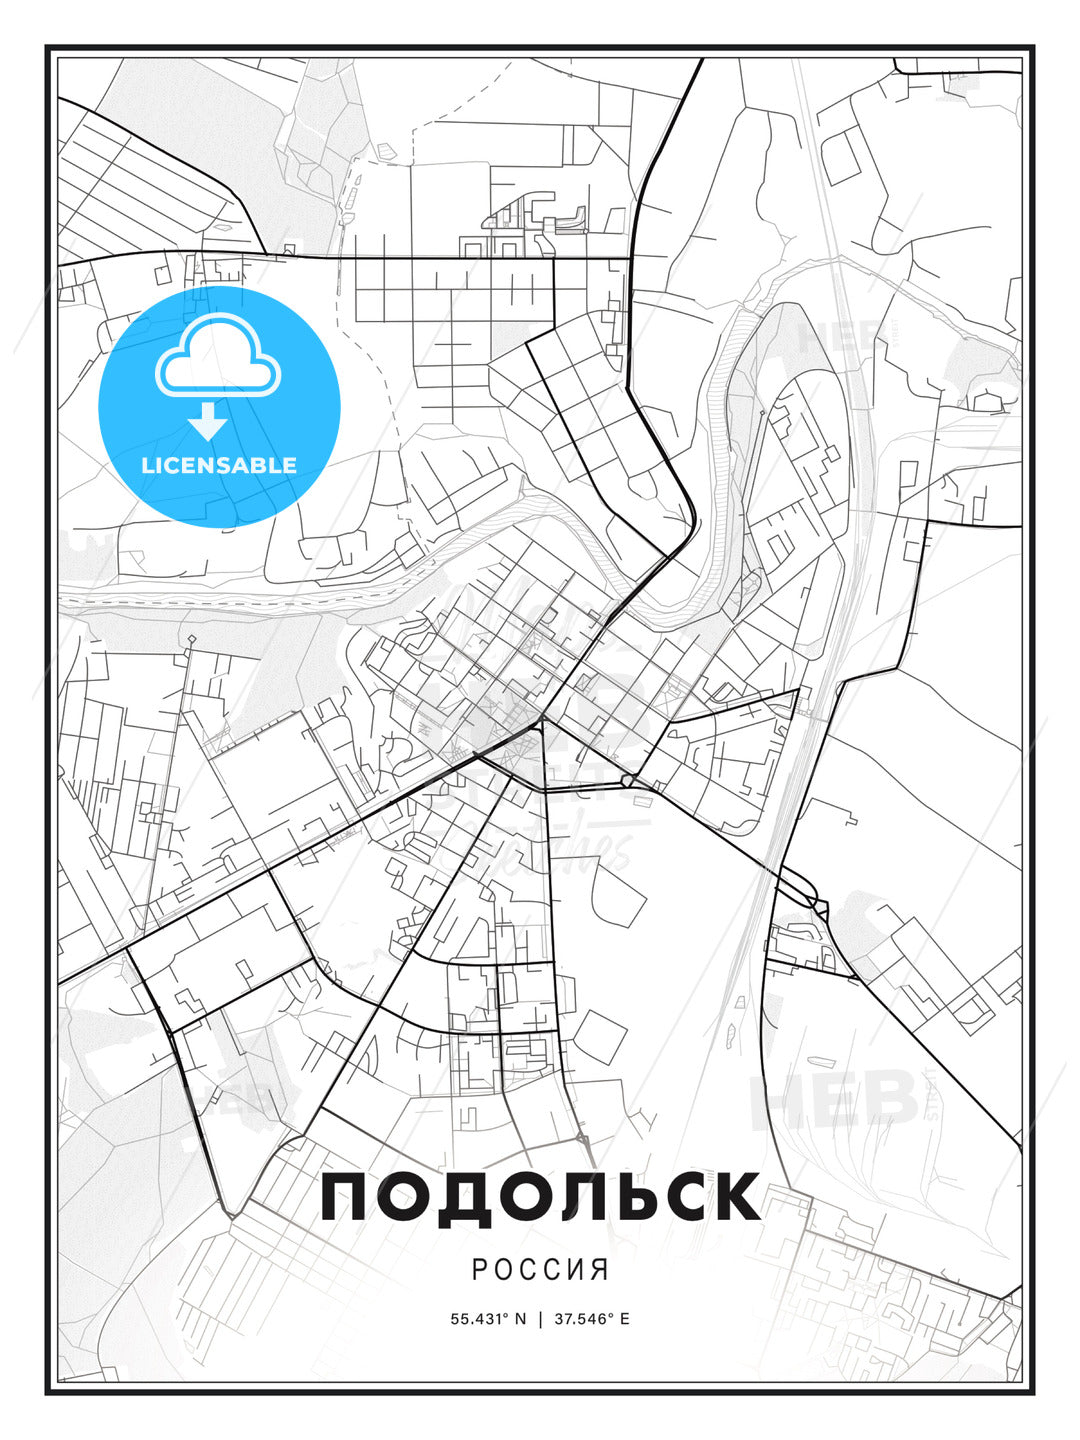 ПОДОЛЬСК / Podolsk, Russia, Modern Print Template in Various Formats - HEBSTREITS Sketches